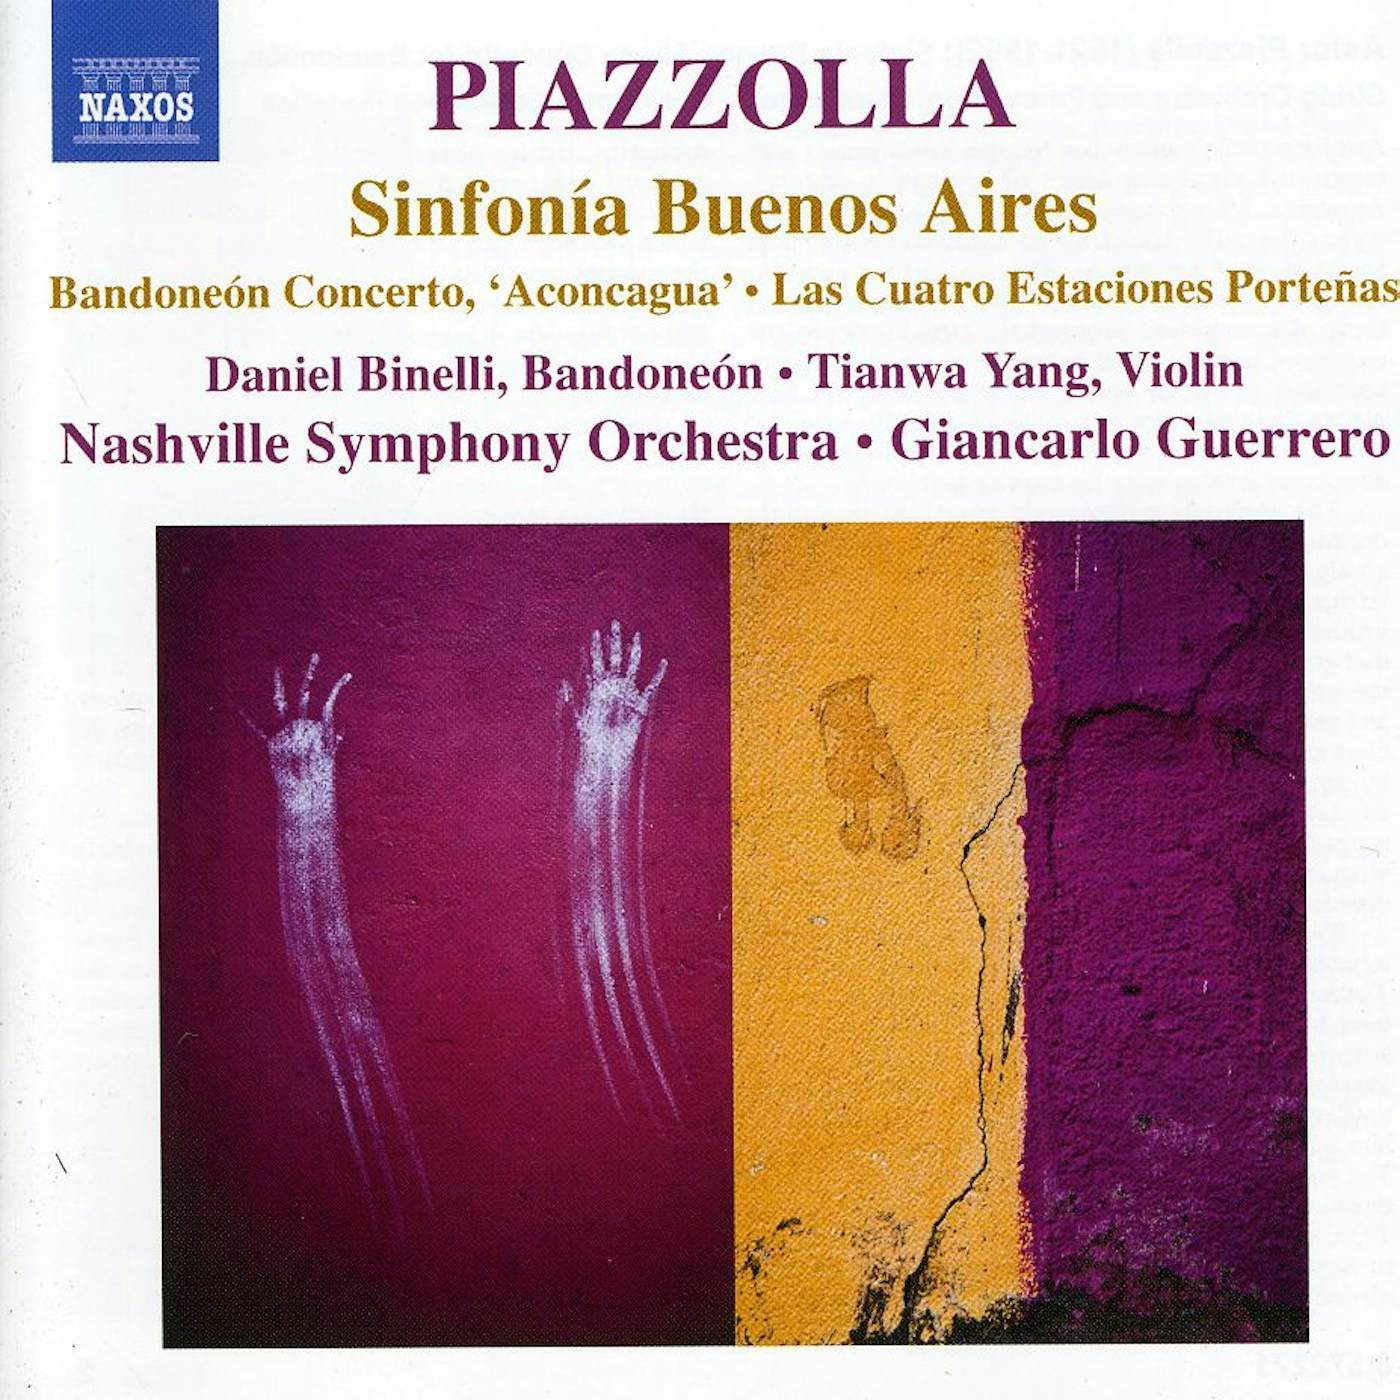 Astor Piazzolla SINFONIA BUENOS AIRES BANDONE CD